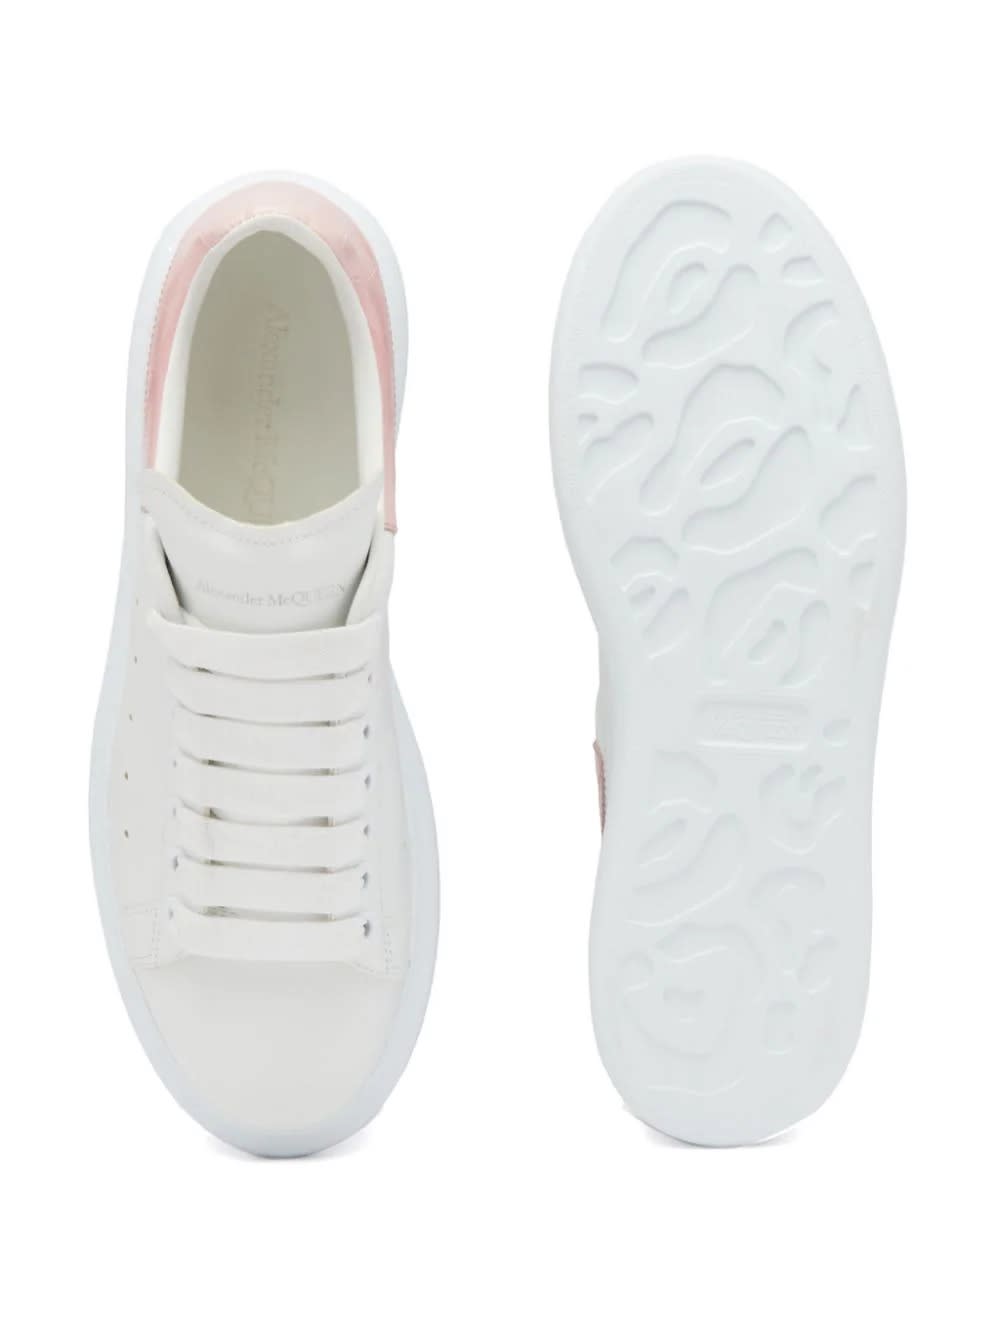 Shop Alexander Mcqueen Oversized Sneakers In White And Clay With Crocodile Effect Spoiler